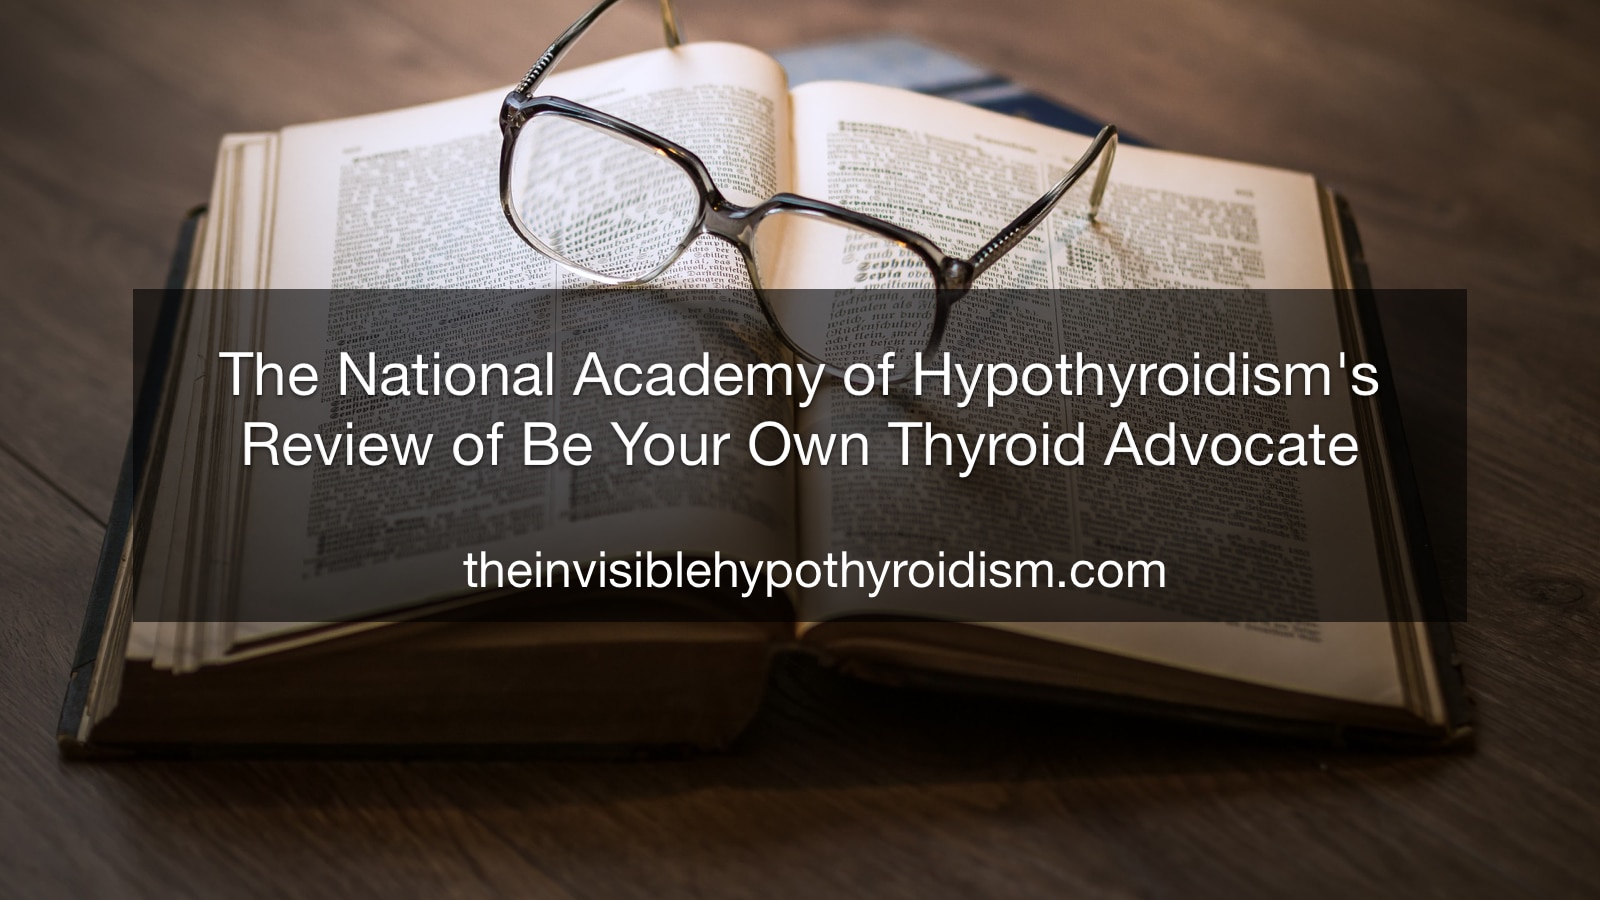 The National Academy of Hypothyroidism's Review of Be Your Own Thyroid Advocate